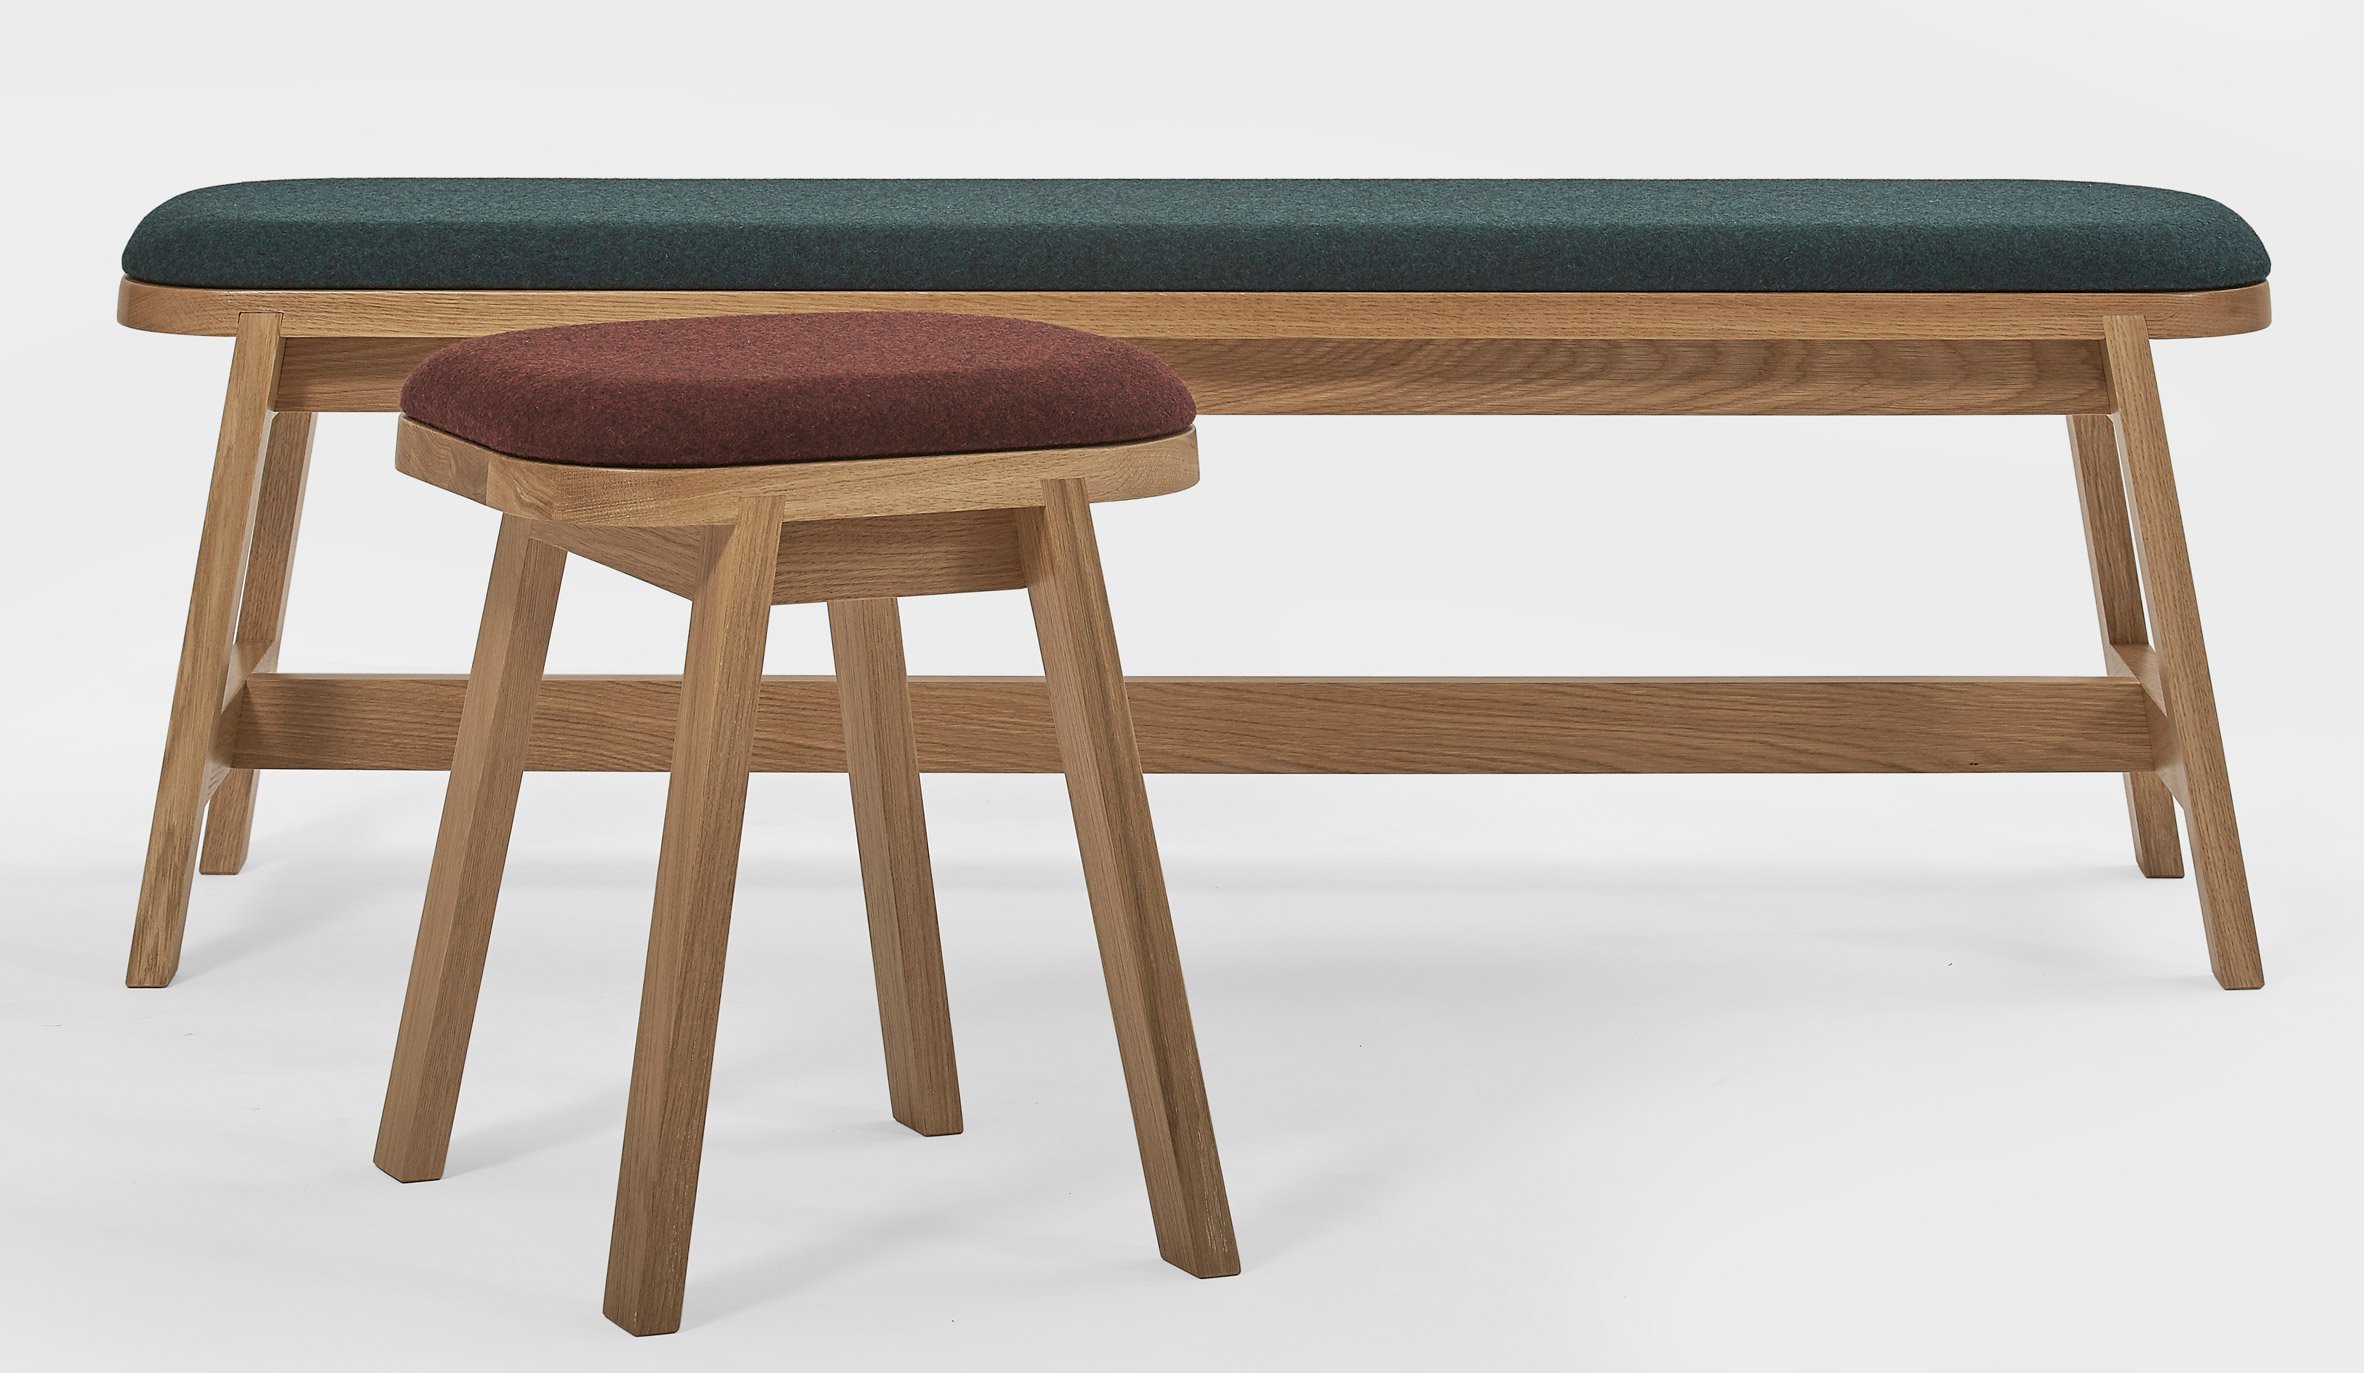 work-series-another-country-design-furniture-cropped_dezeen_2364_col_35.jpg